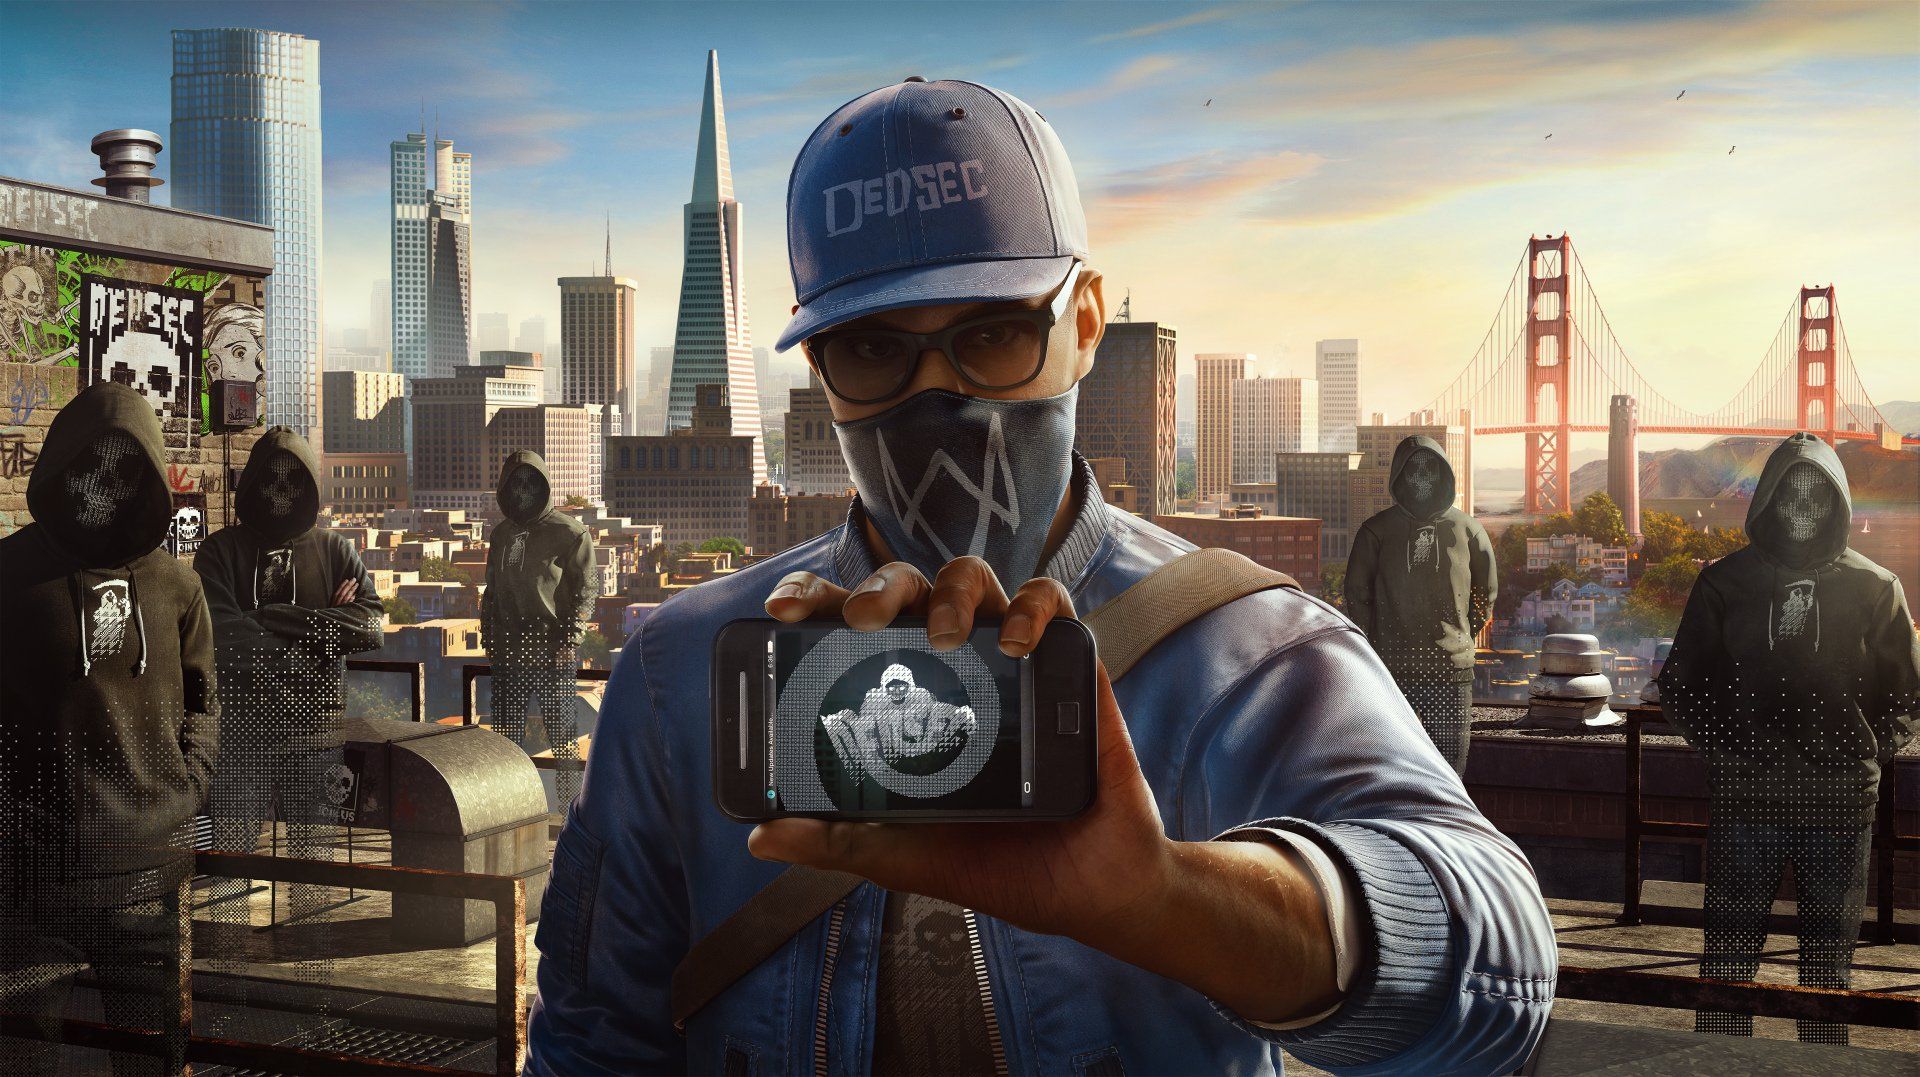 watch_dogs_2-3421092